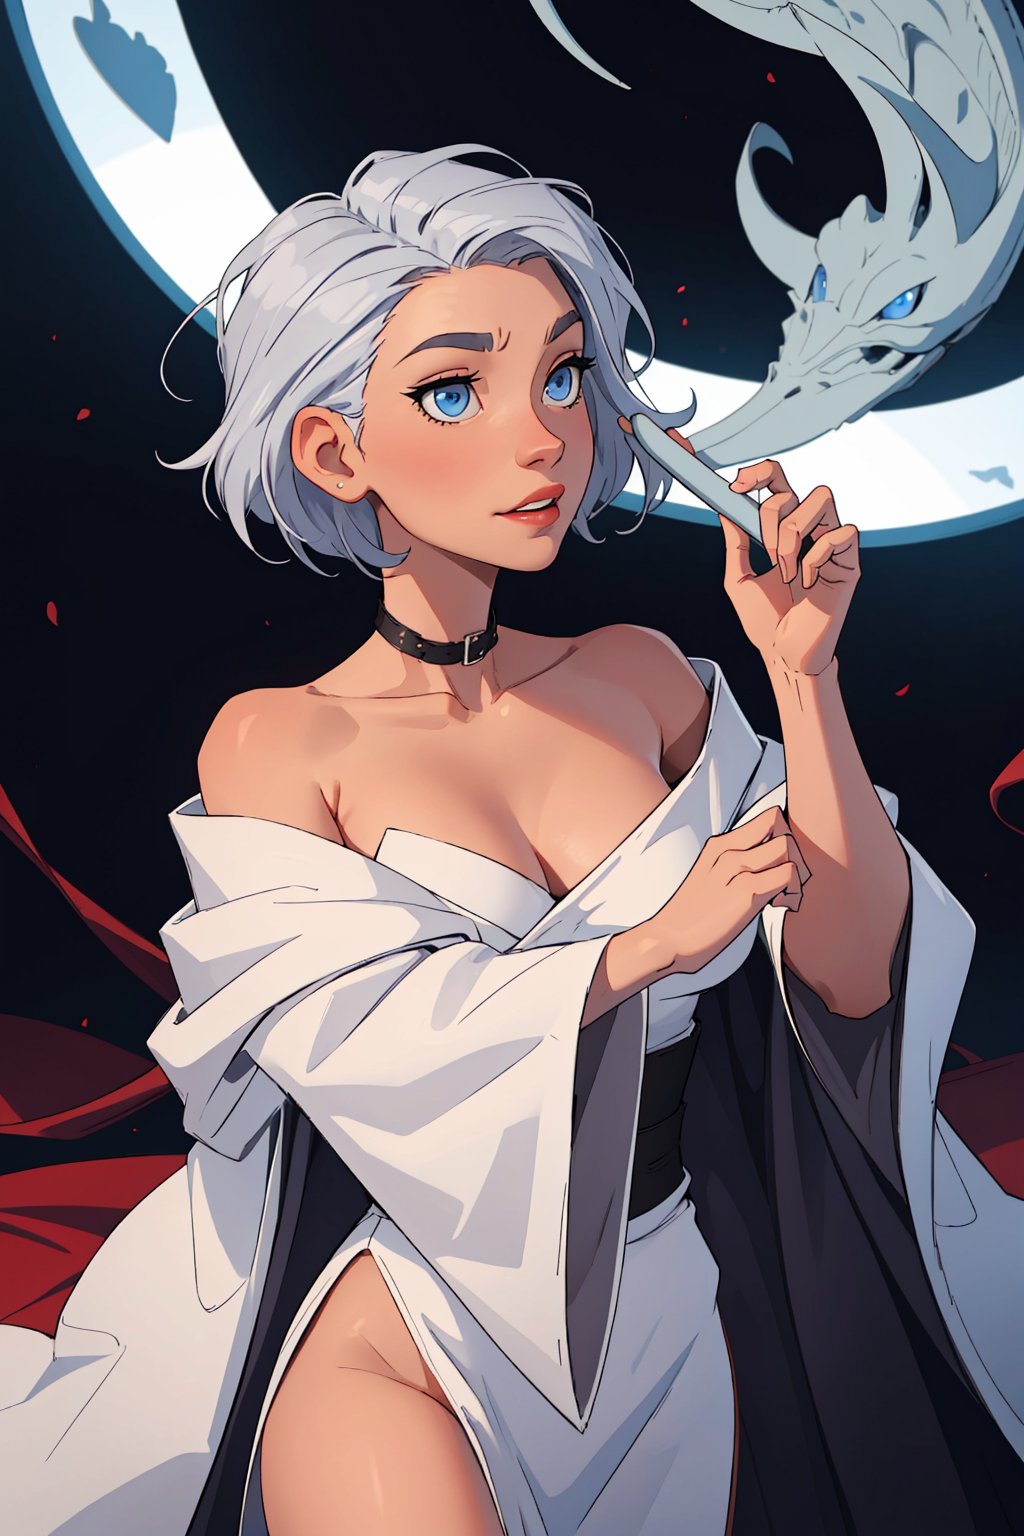 1female, silver hair, short_hair, blue eyes, hair_style, different style hair, SAM YANG,witch outfit, bare shoulders, white robe, kinky pose, kinky face,